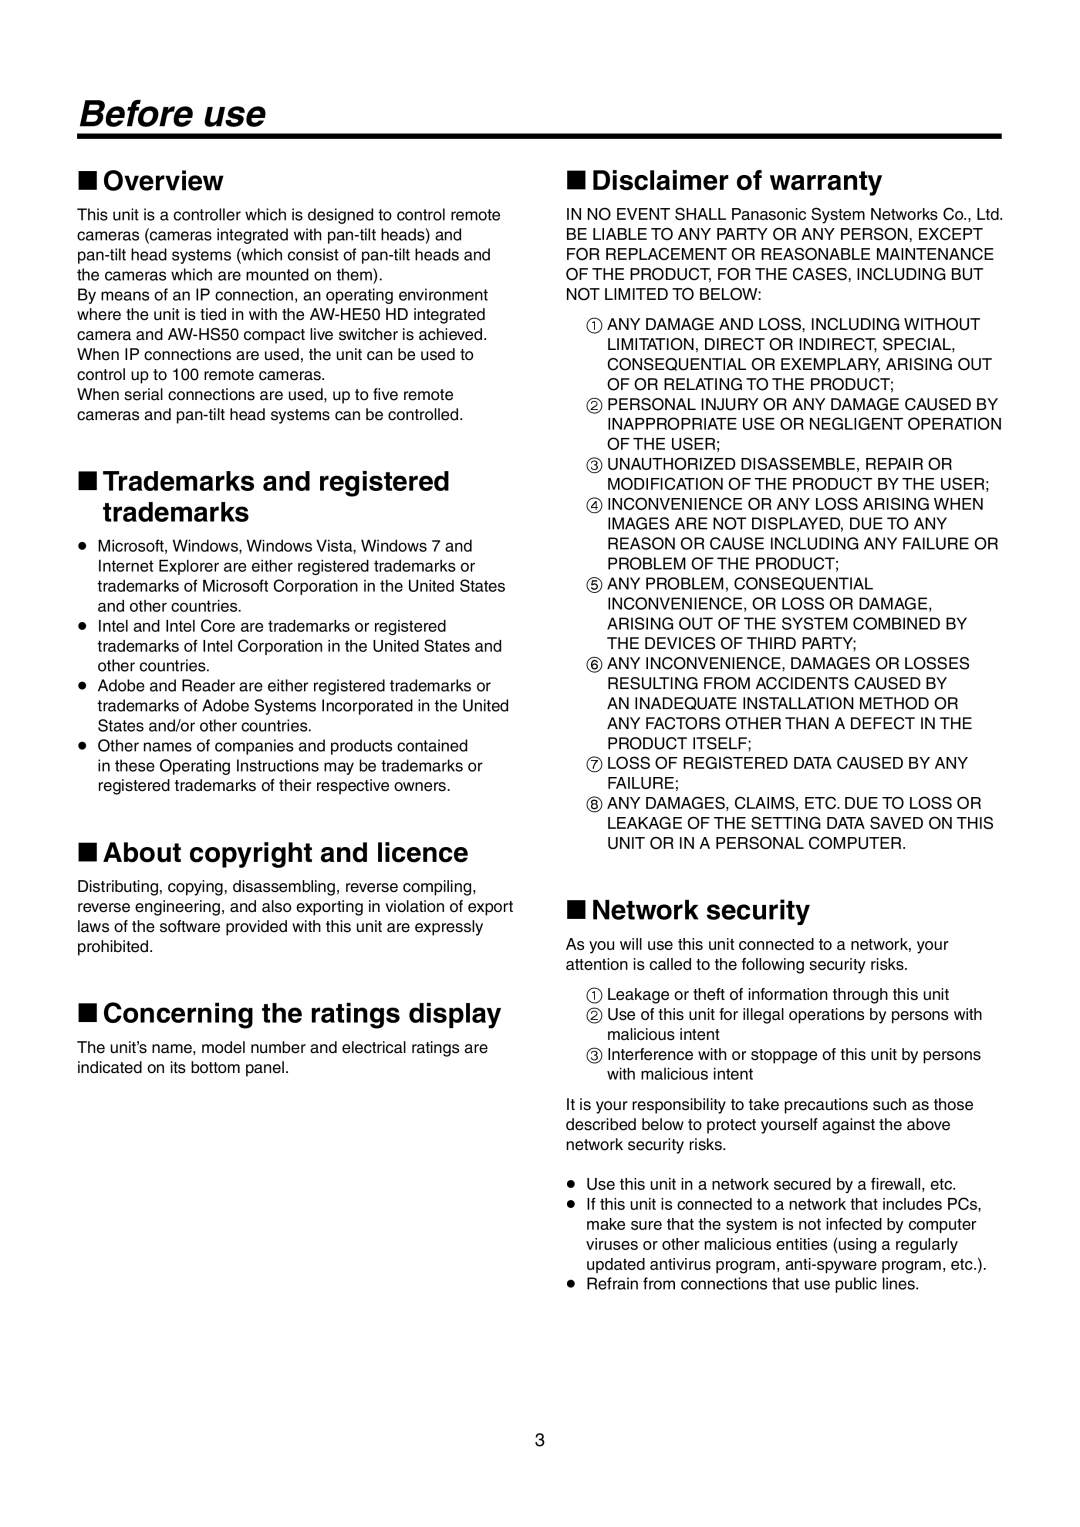 Panasonic AW-RP50N Before use, Overview, Trademarks and registered trademarks, About copyright and licence 